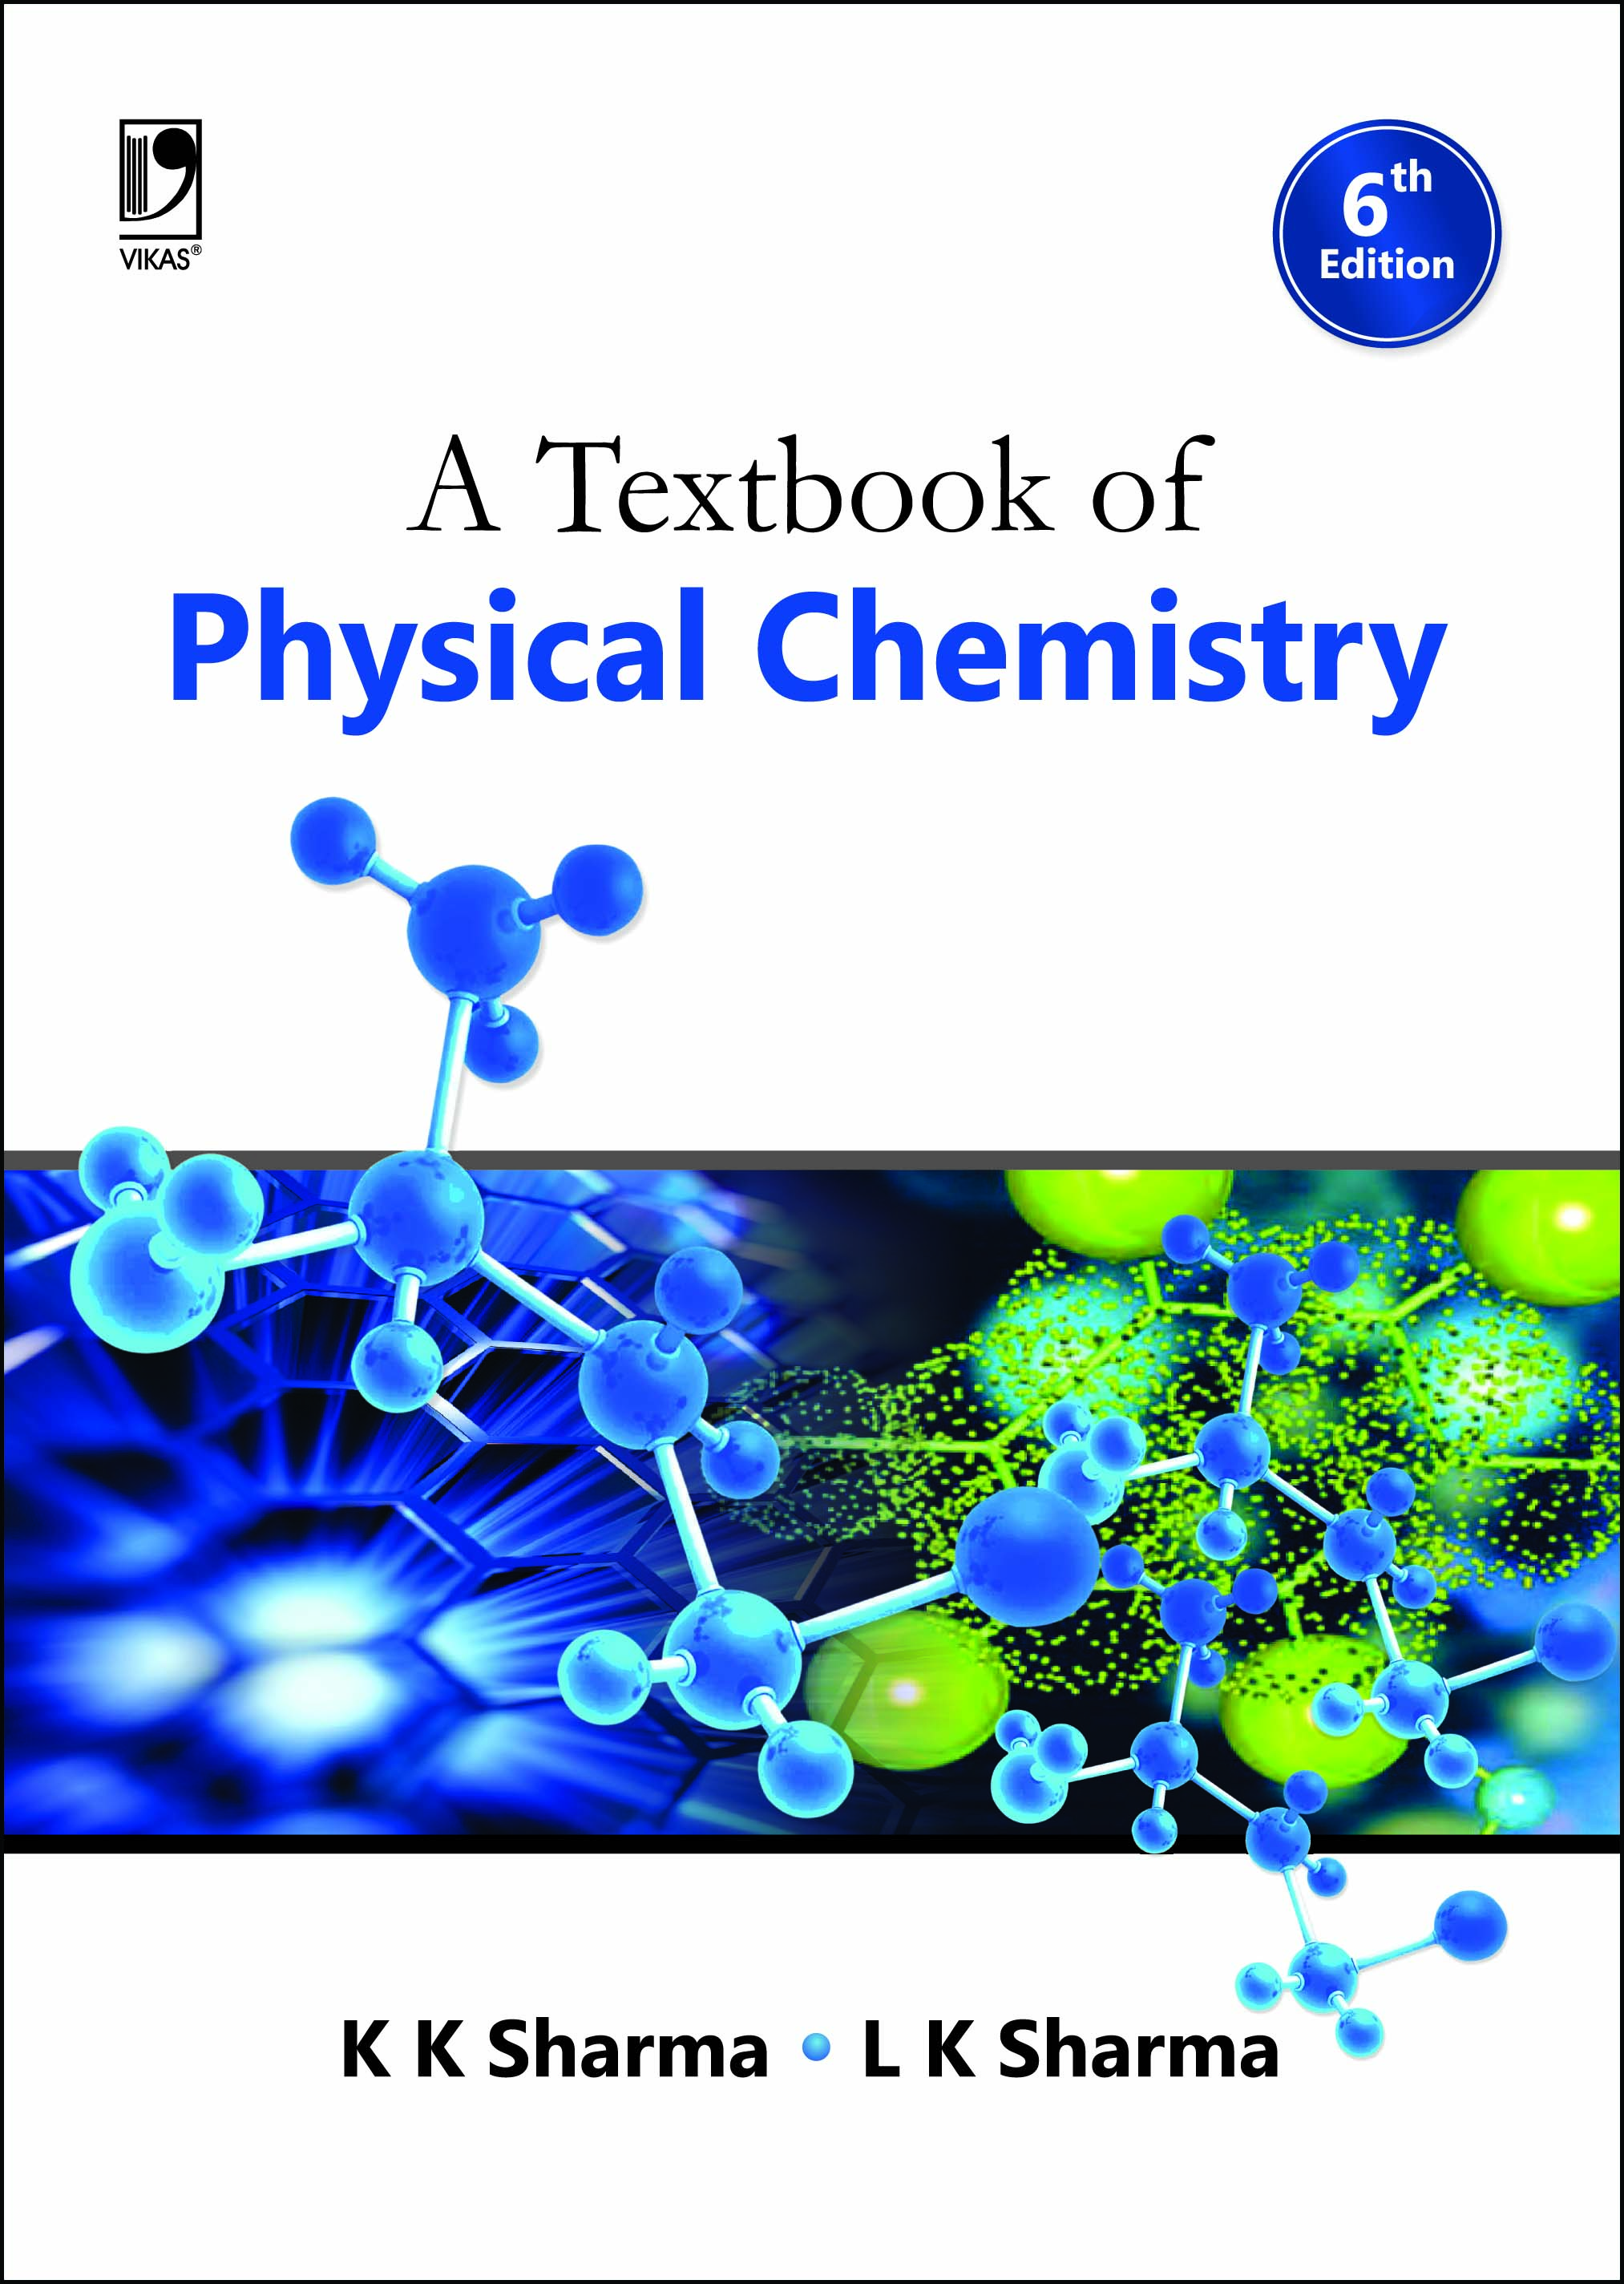 research paper on physical chemistry